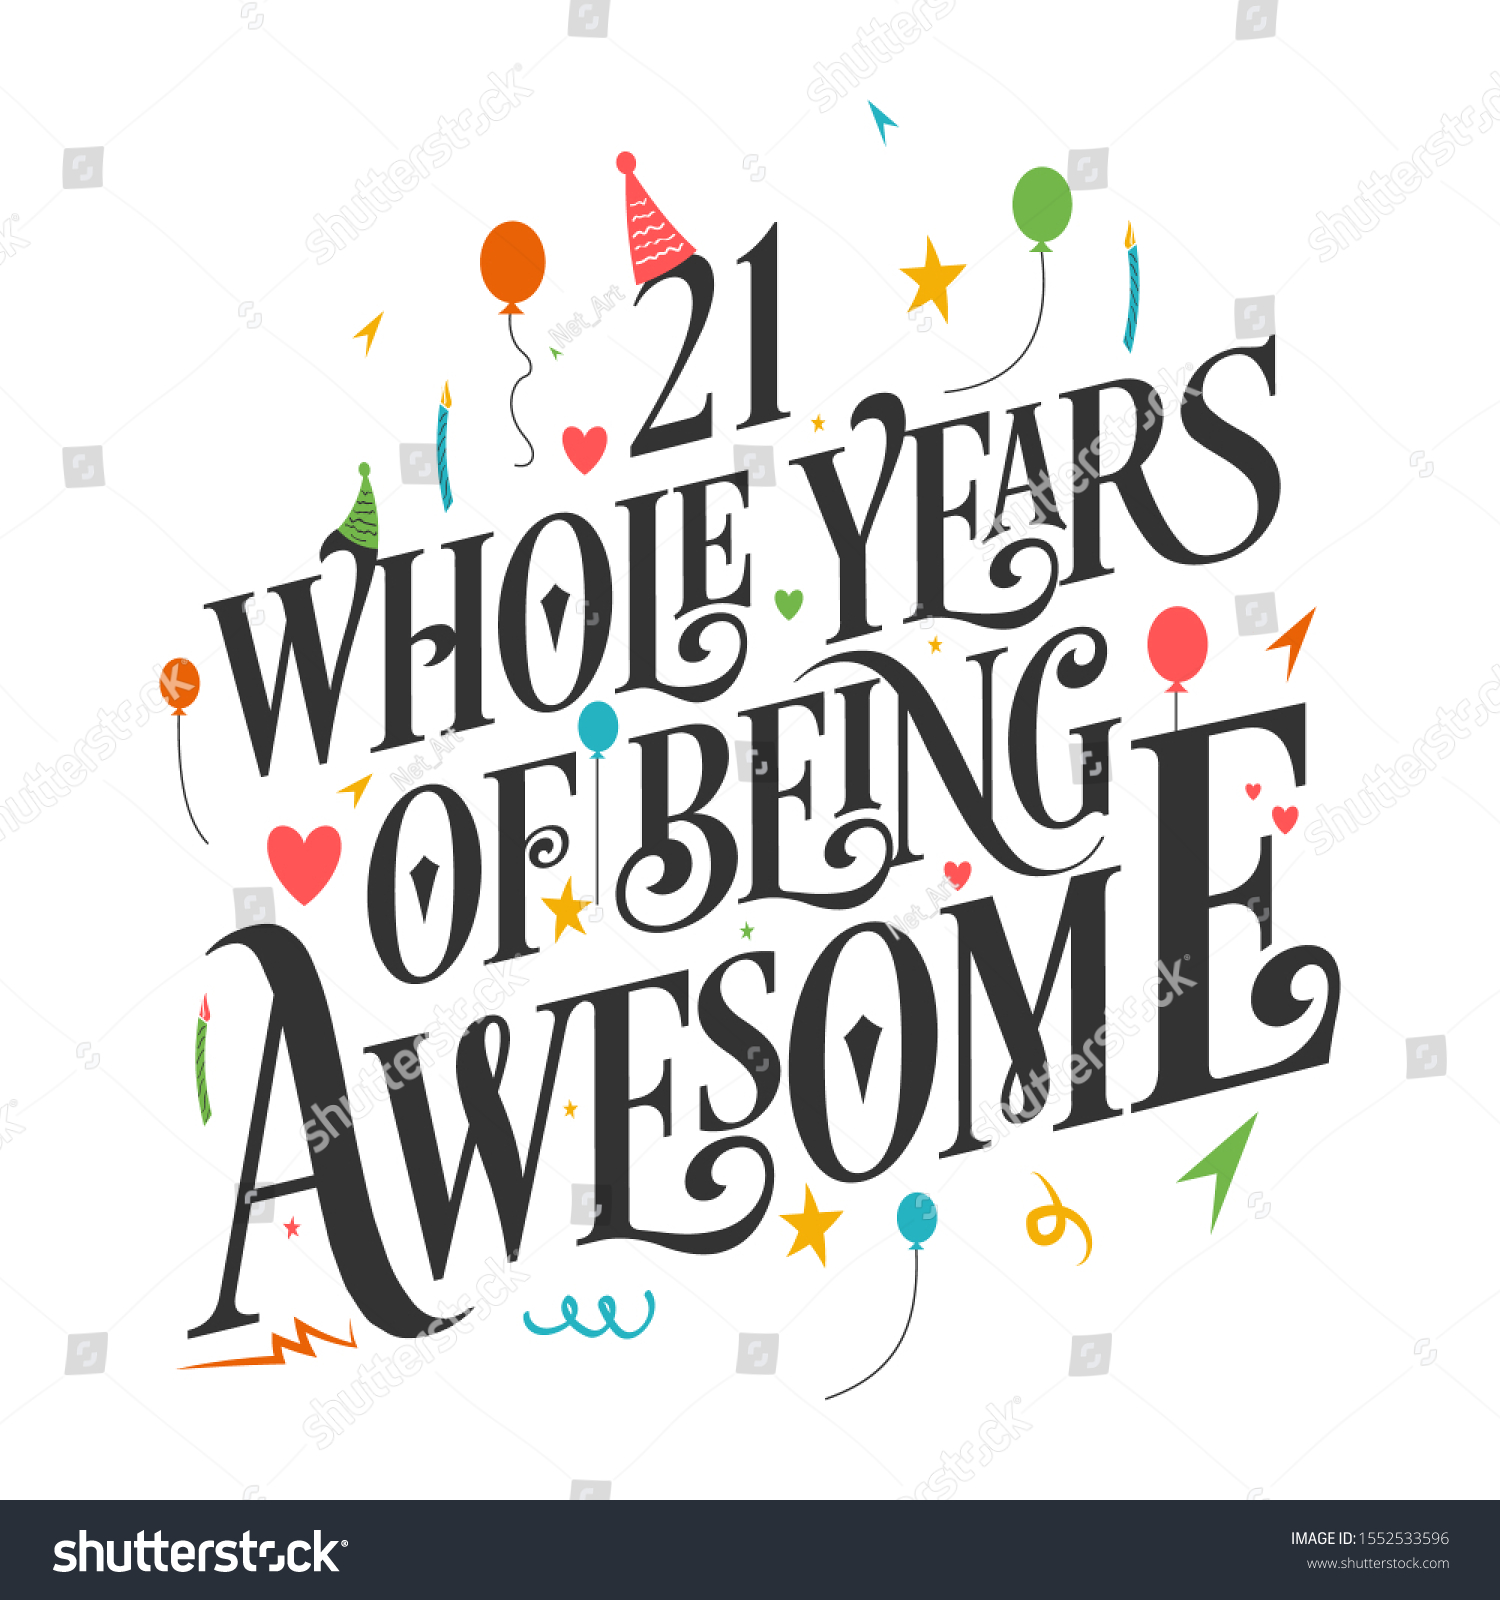 SVG of 21st Birthday And 21st Anniversary Typography Design - 21 Whole Years Of Being Awesome. svg